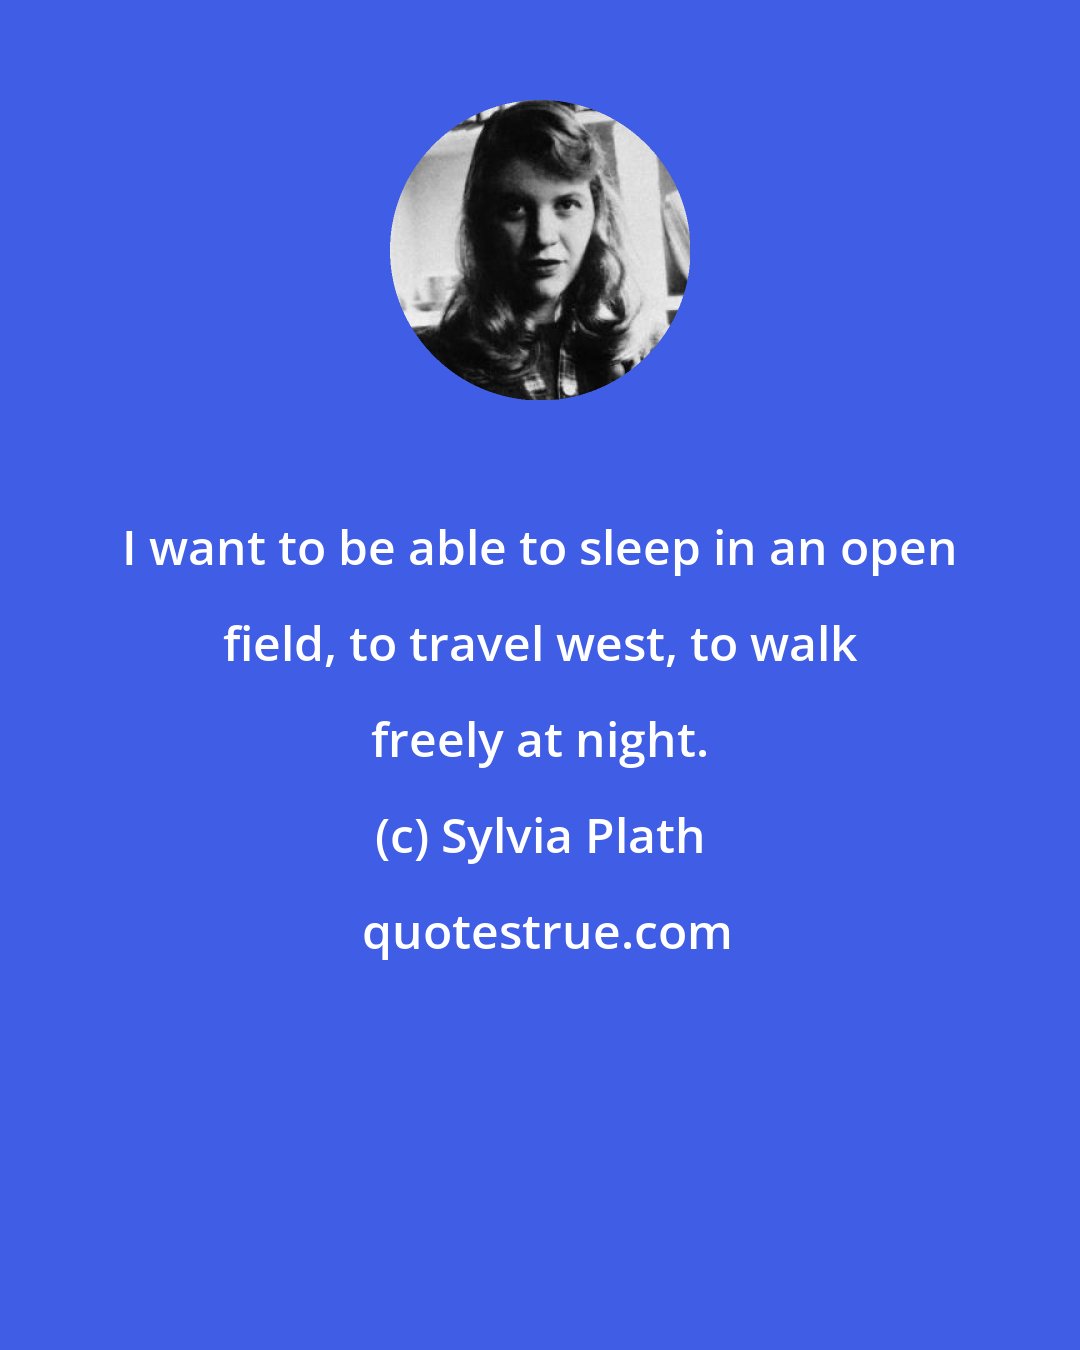 Sylvia Plath: I want to be able to sleep in an open field, to travel west, to walk freely at night.